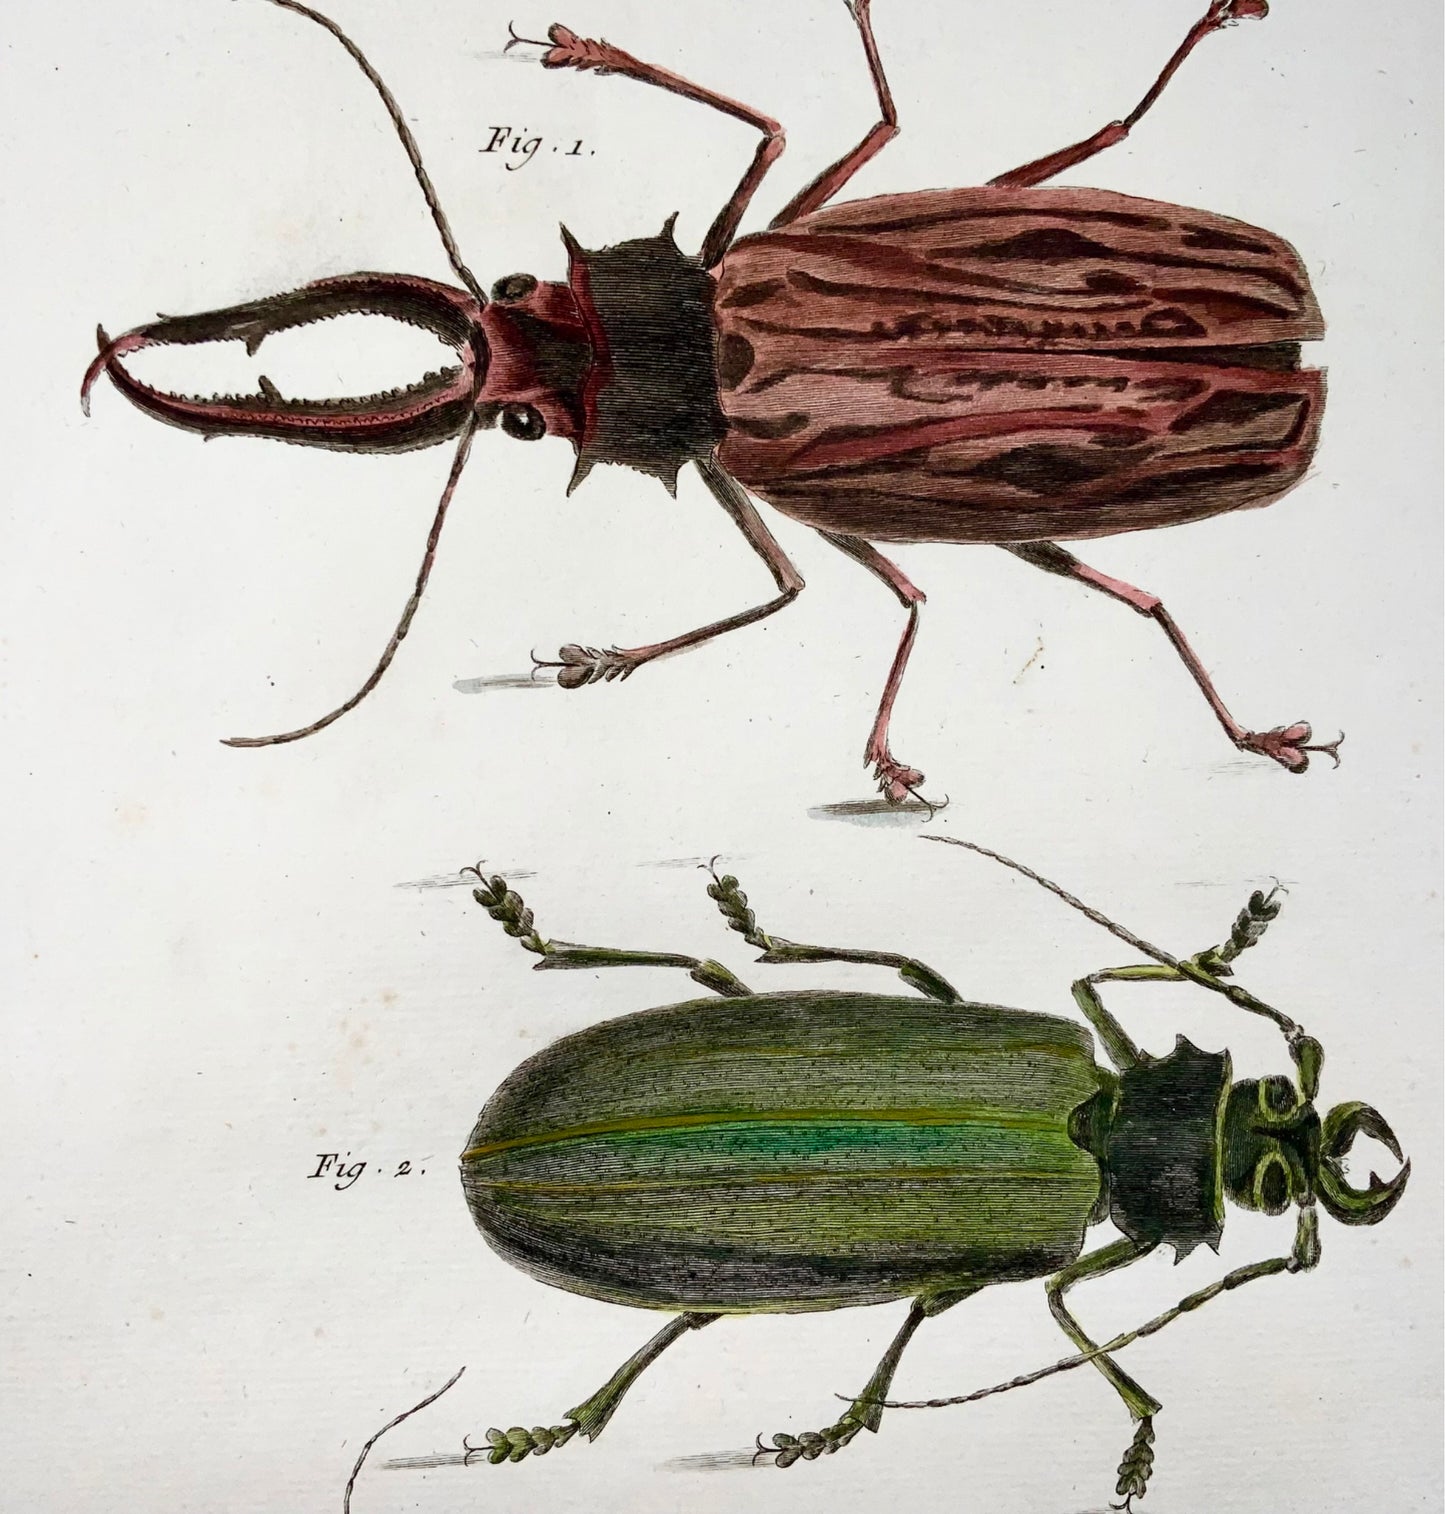 1751 Beetles, insects, Martinet, hand coloured, 39 cm large folio